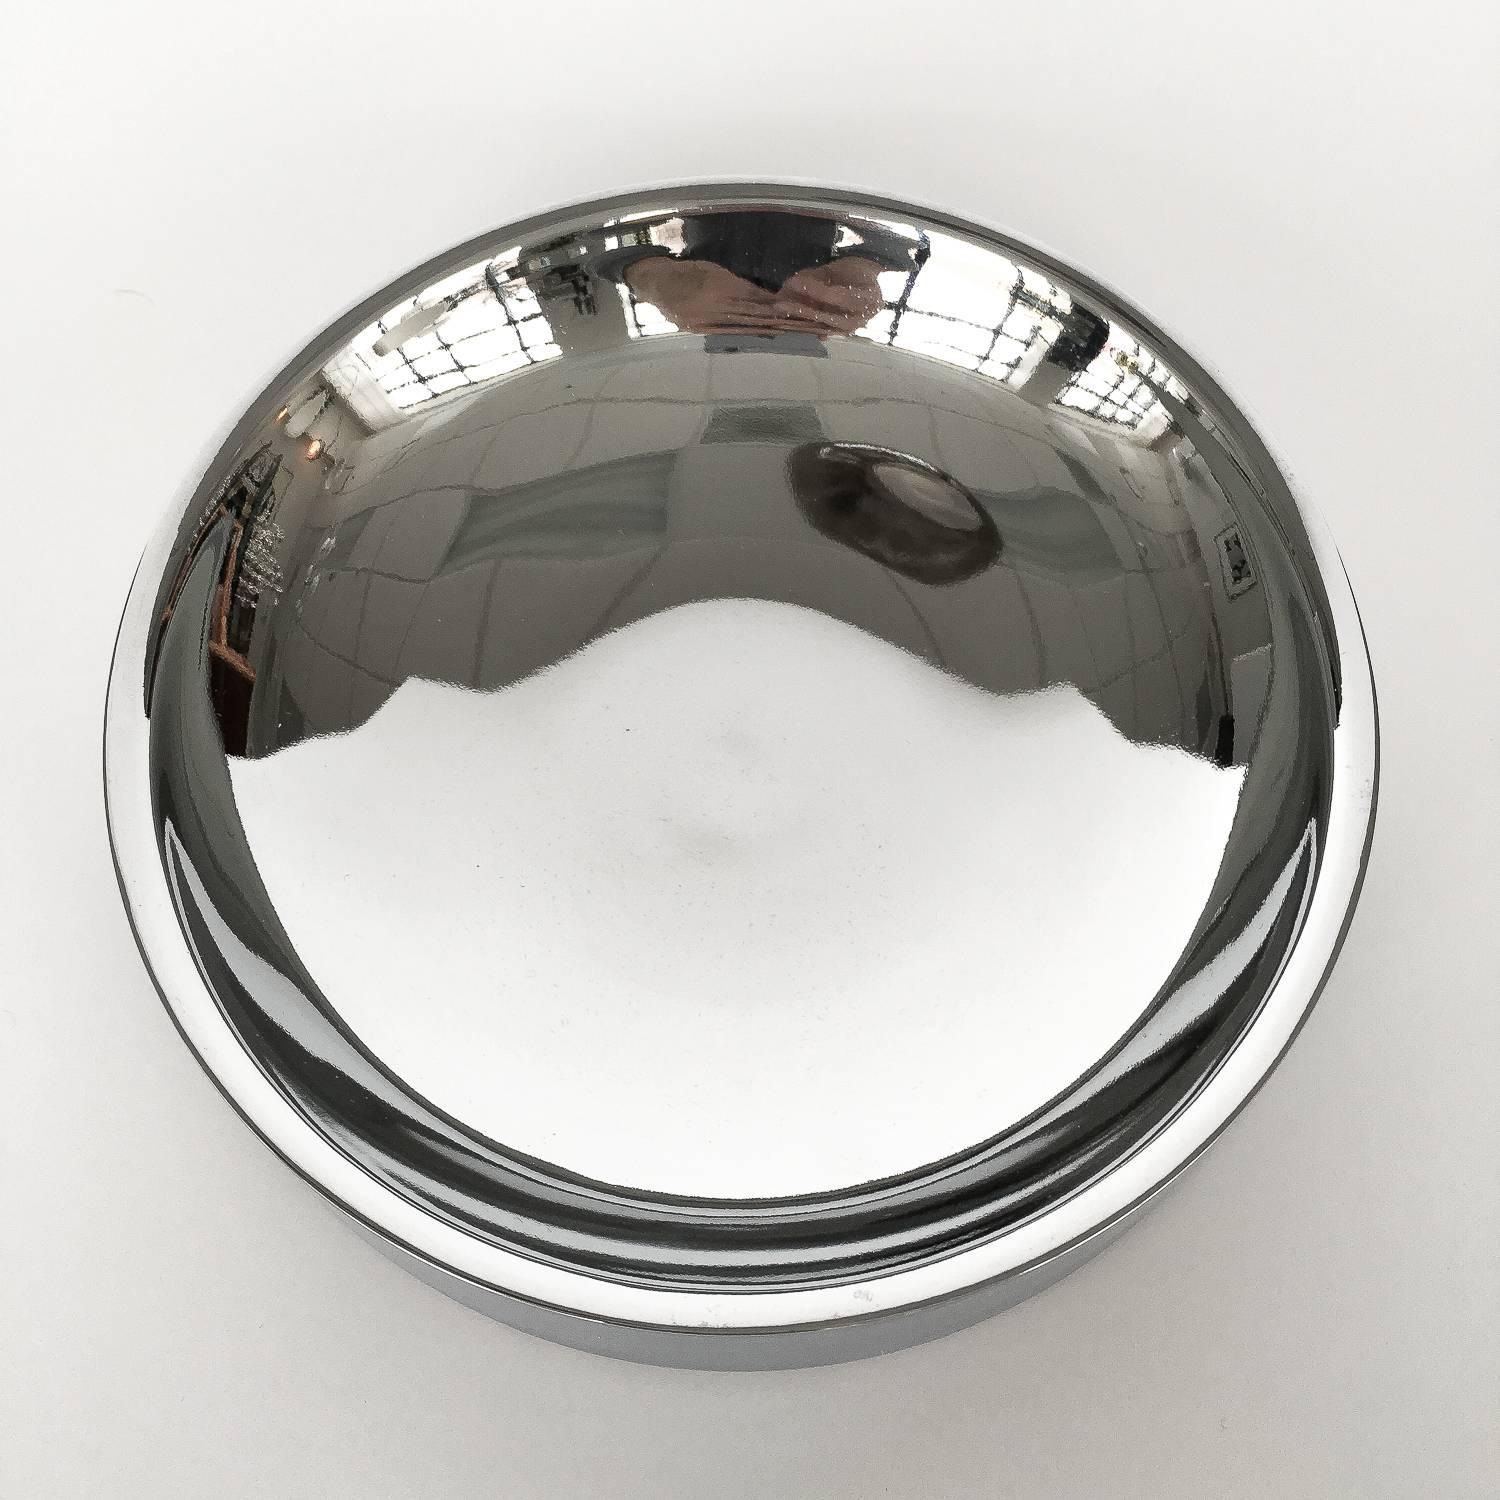 American Chrome Modernist Scoop Catchall Bowl by TSAO Designs